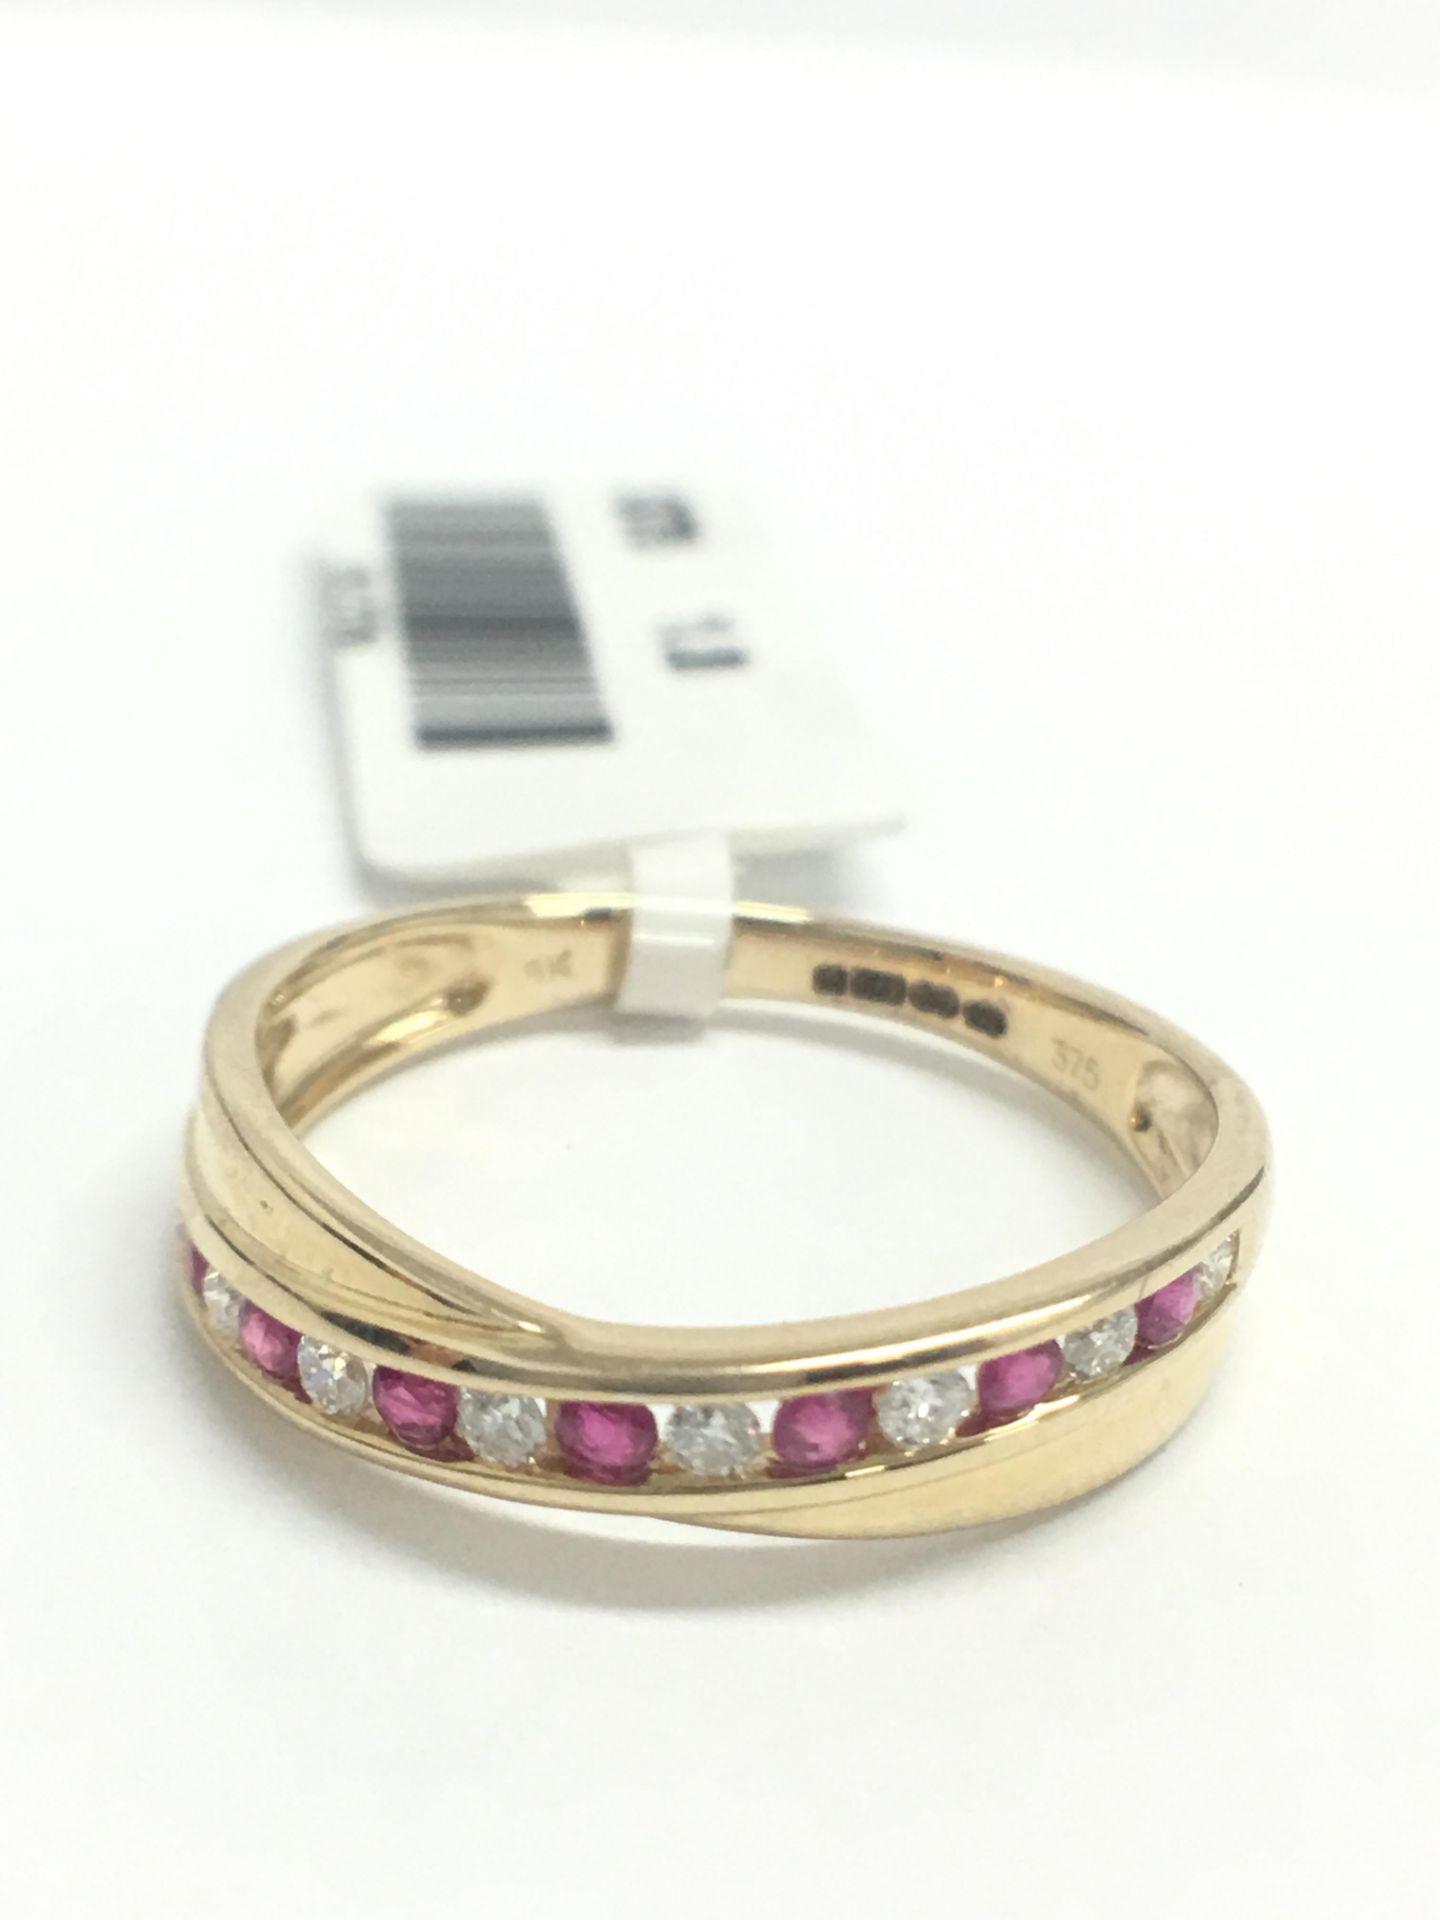 9ct Yellow Gold Ruby Diamond Crossover Band Ring - Image 2 of 8